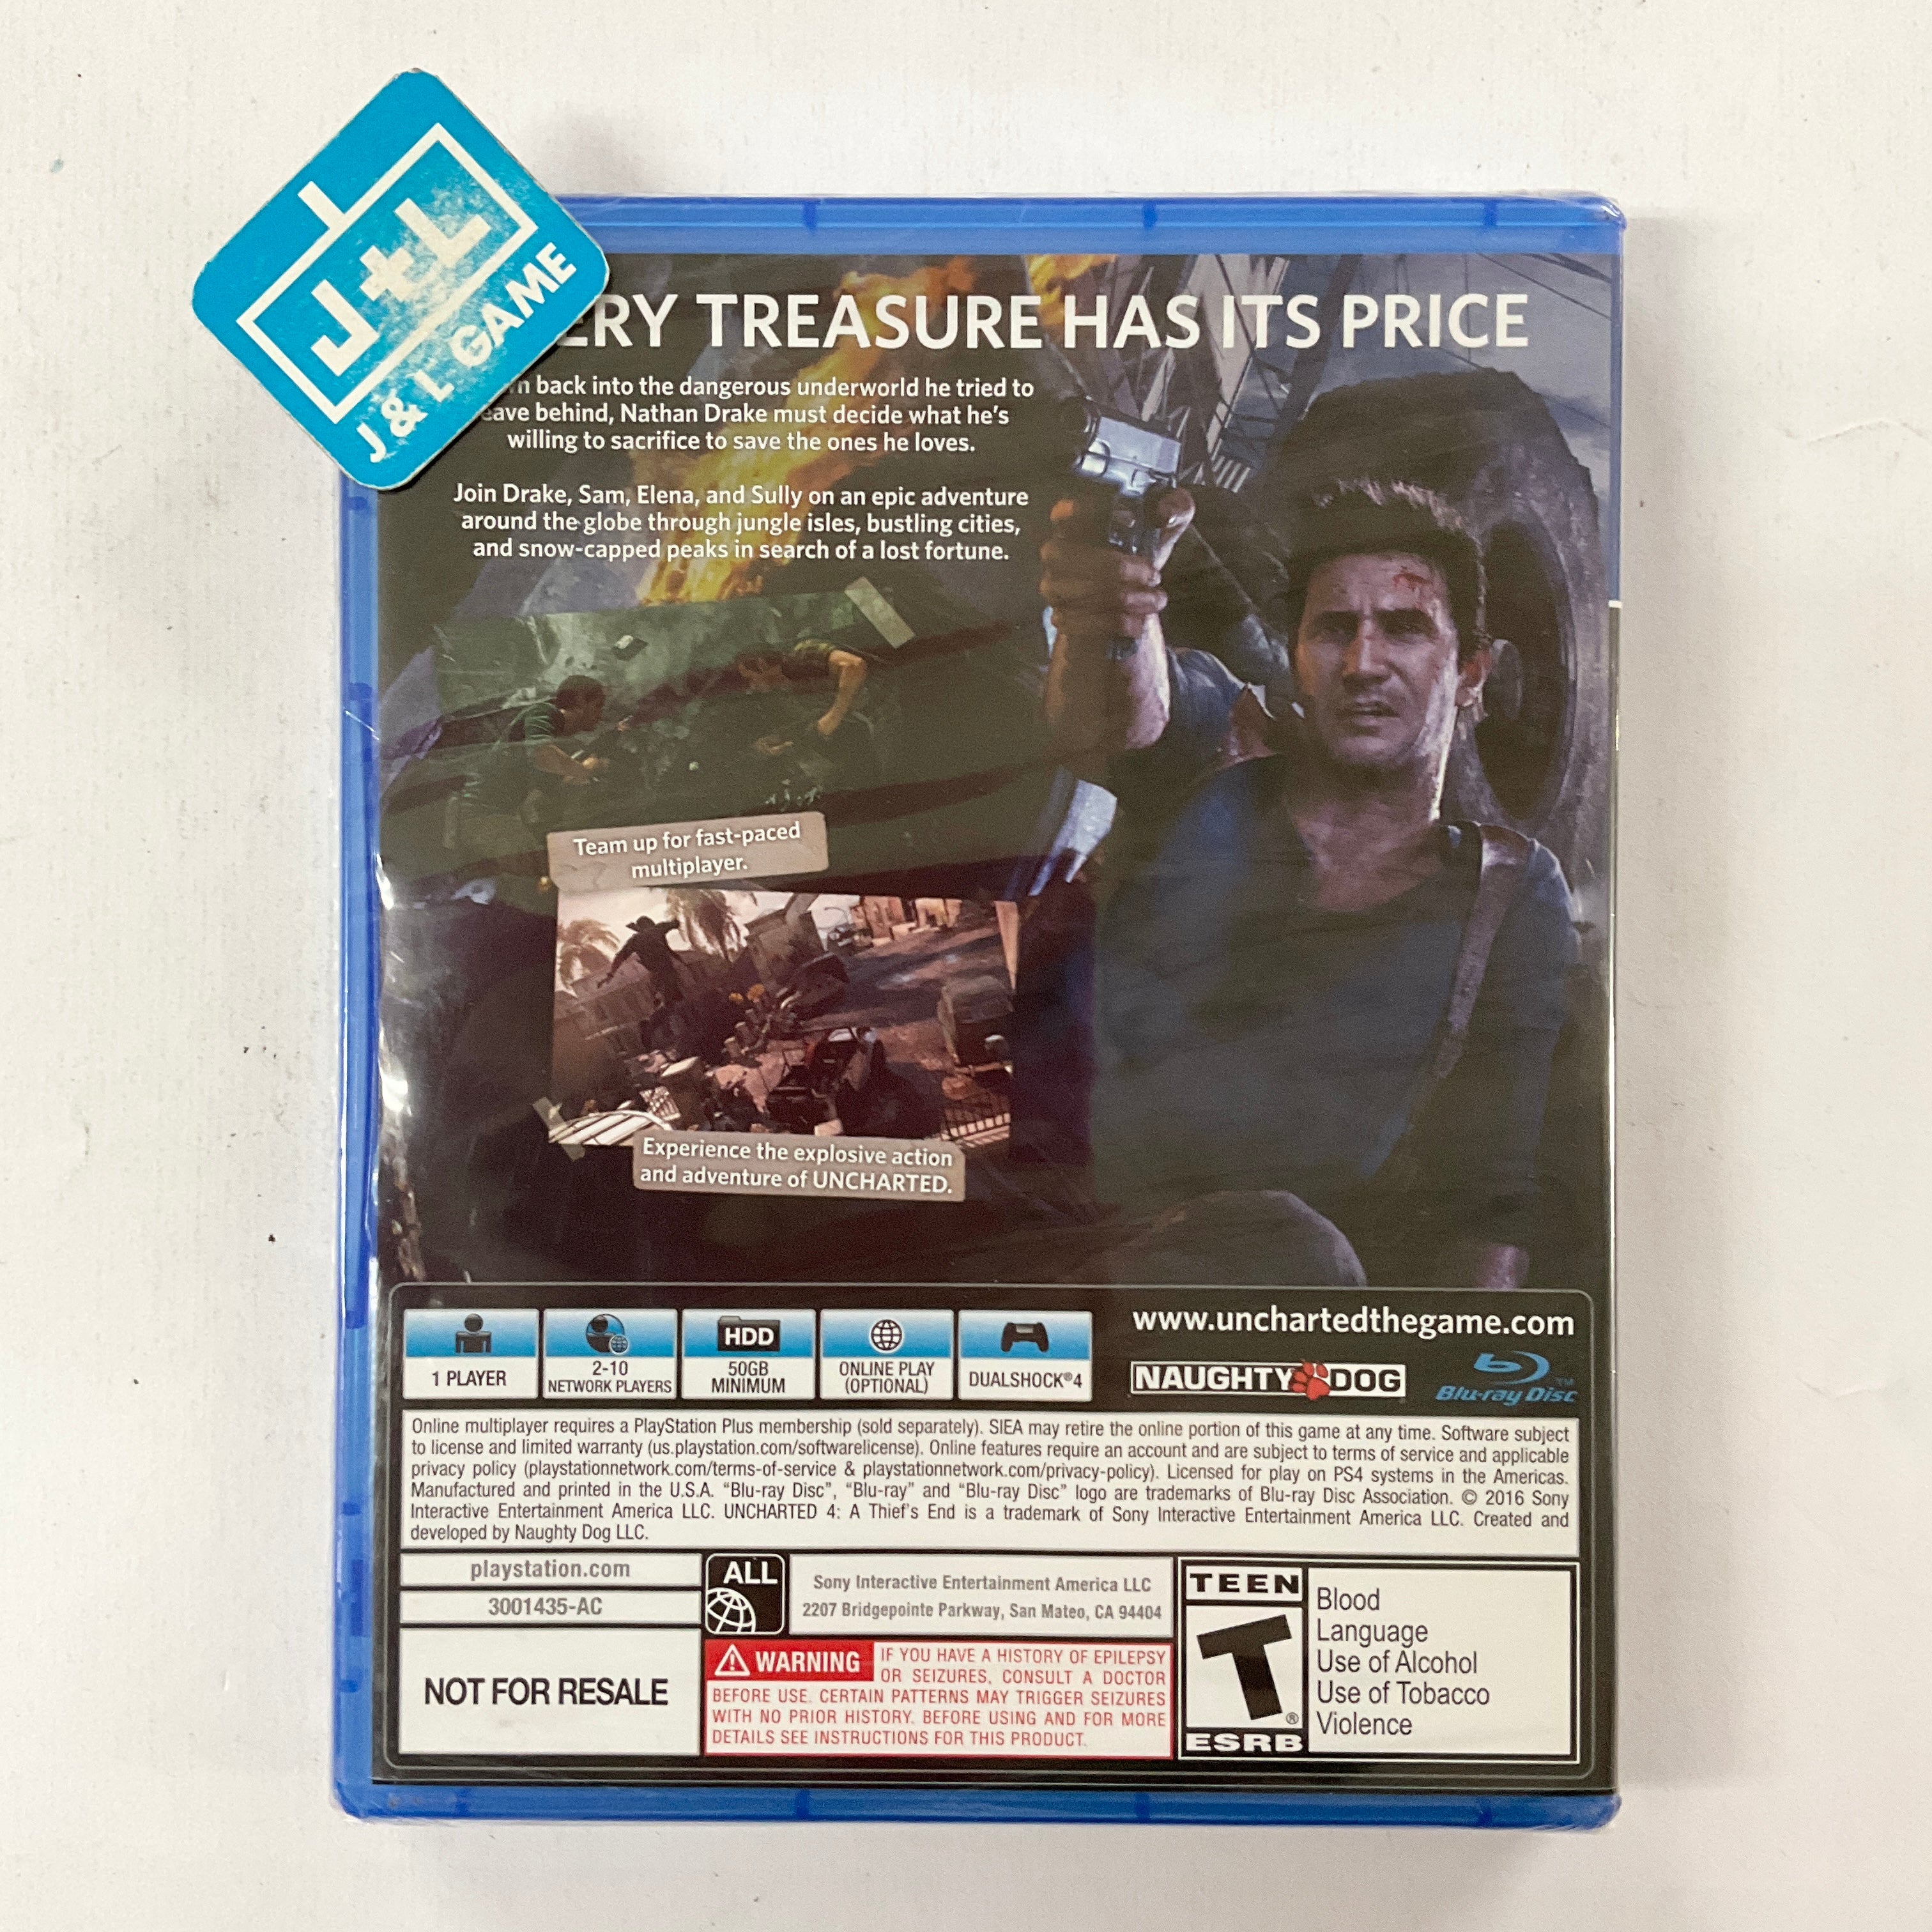 Uncharted 4: A Thief's End (NFR) - (PS4) PlayStation 4 Video Games SCEA   